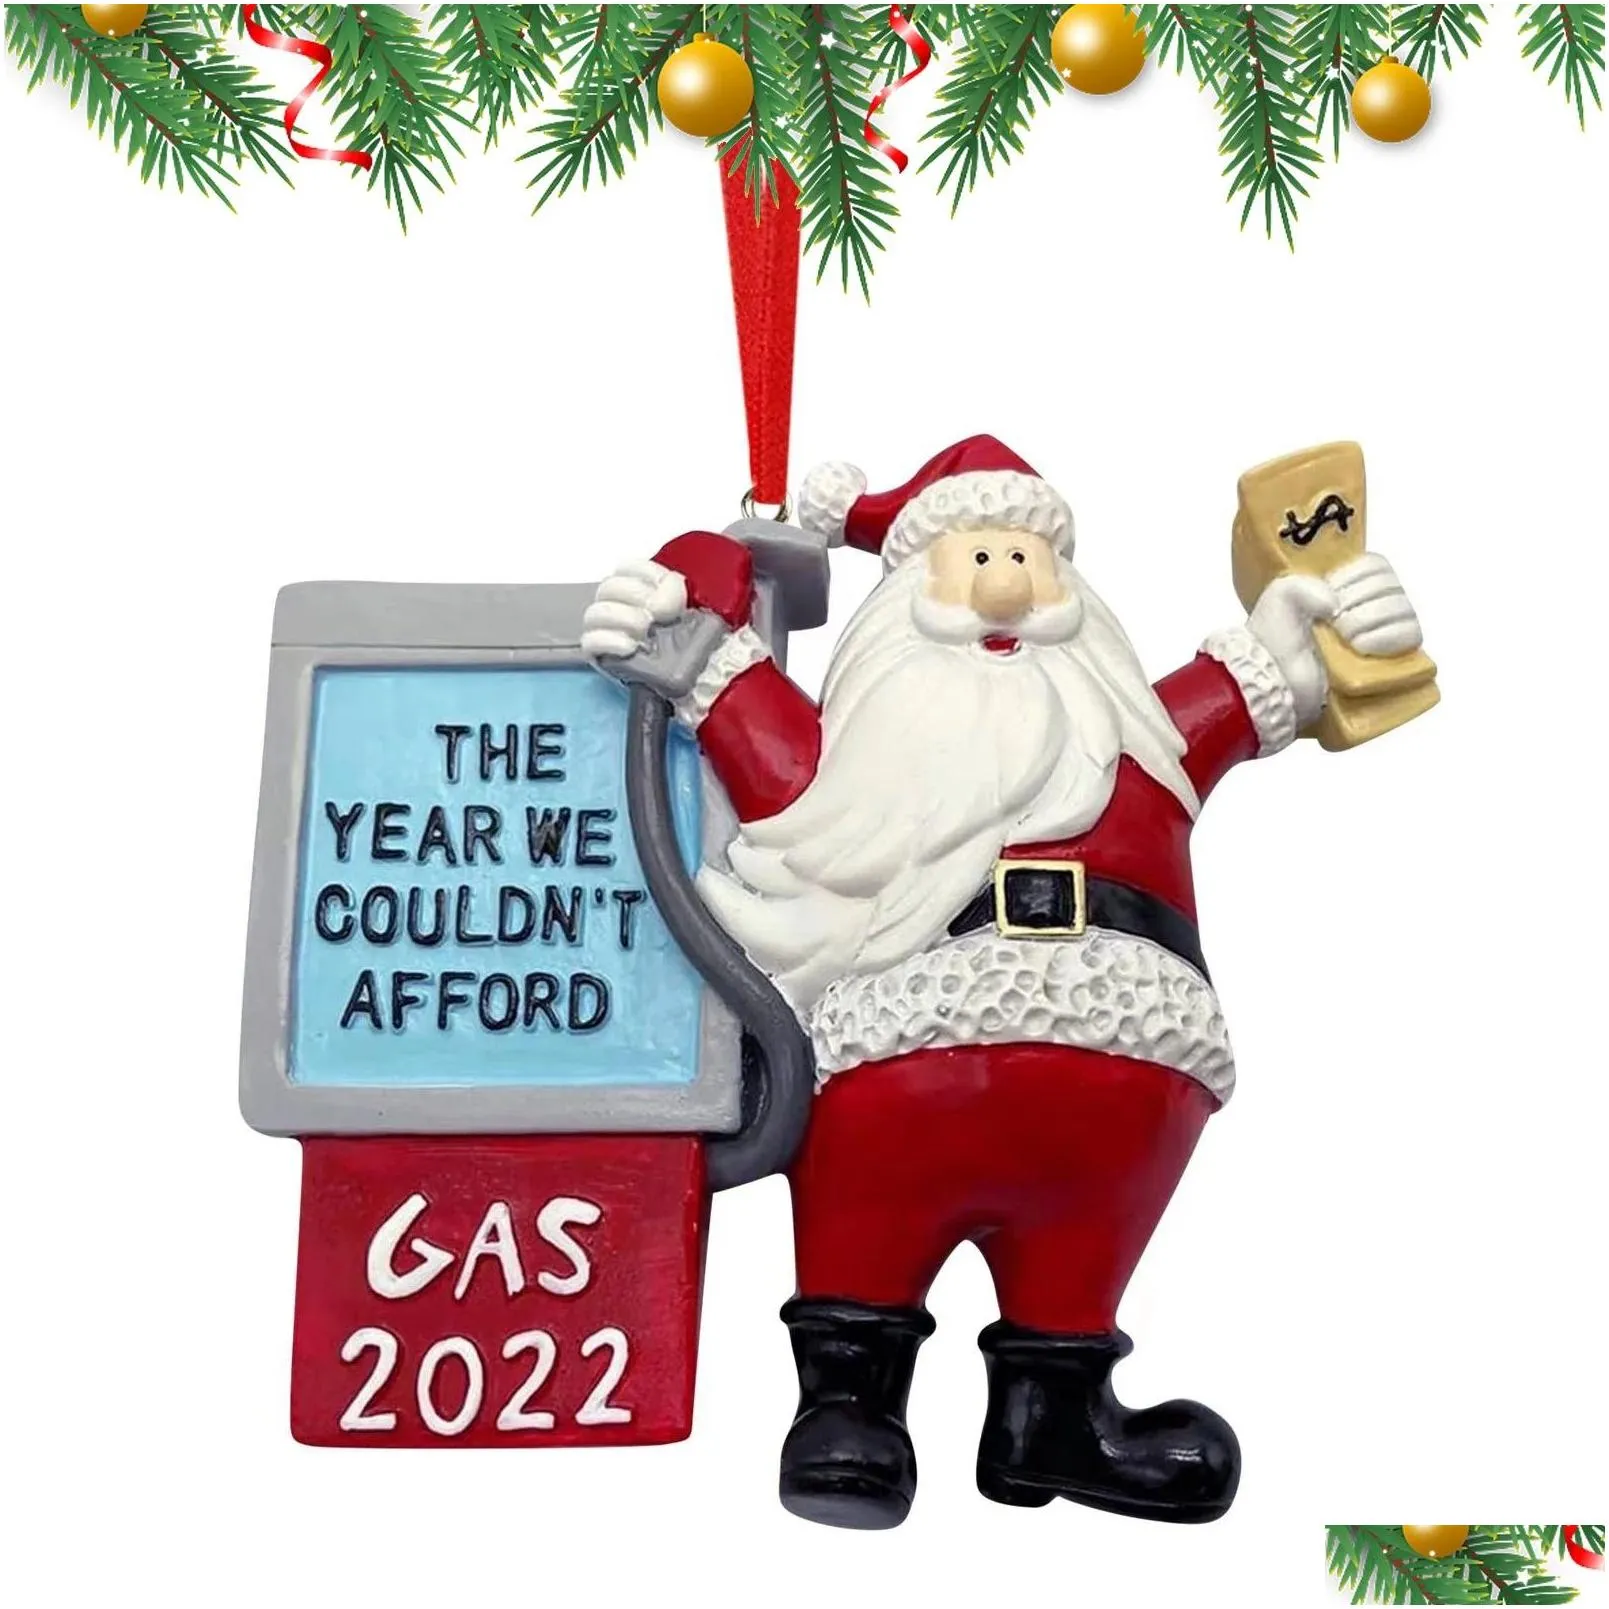 funny xmas santa claus ornaments the year we couldnt afford gas 2022 year christmas tree hanging pendant decoration